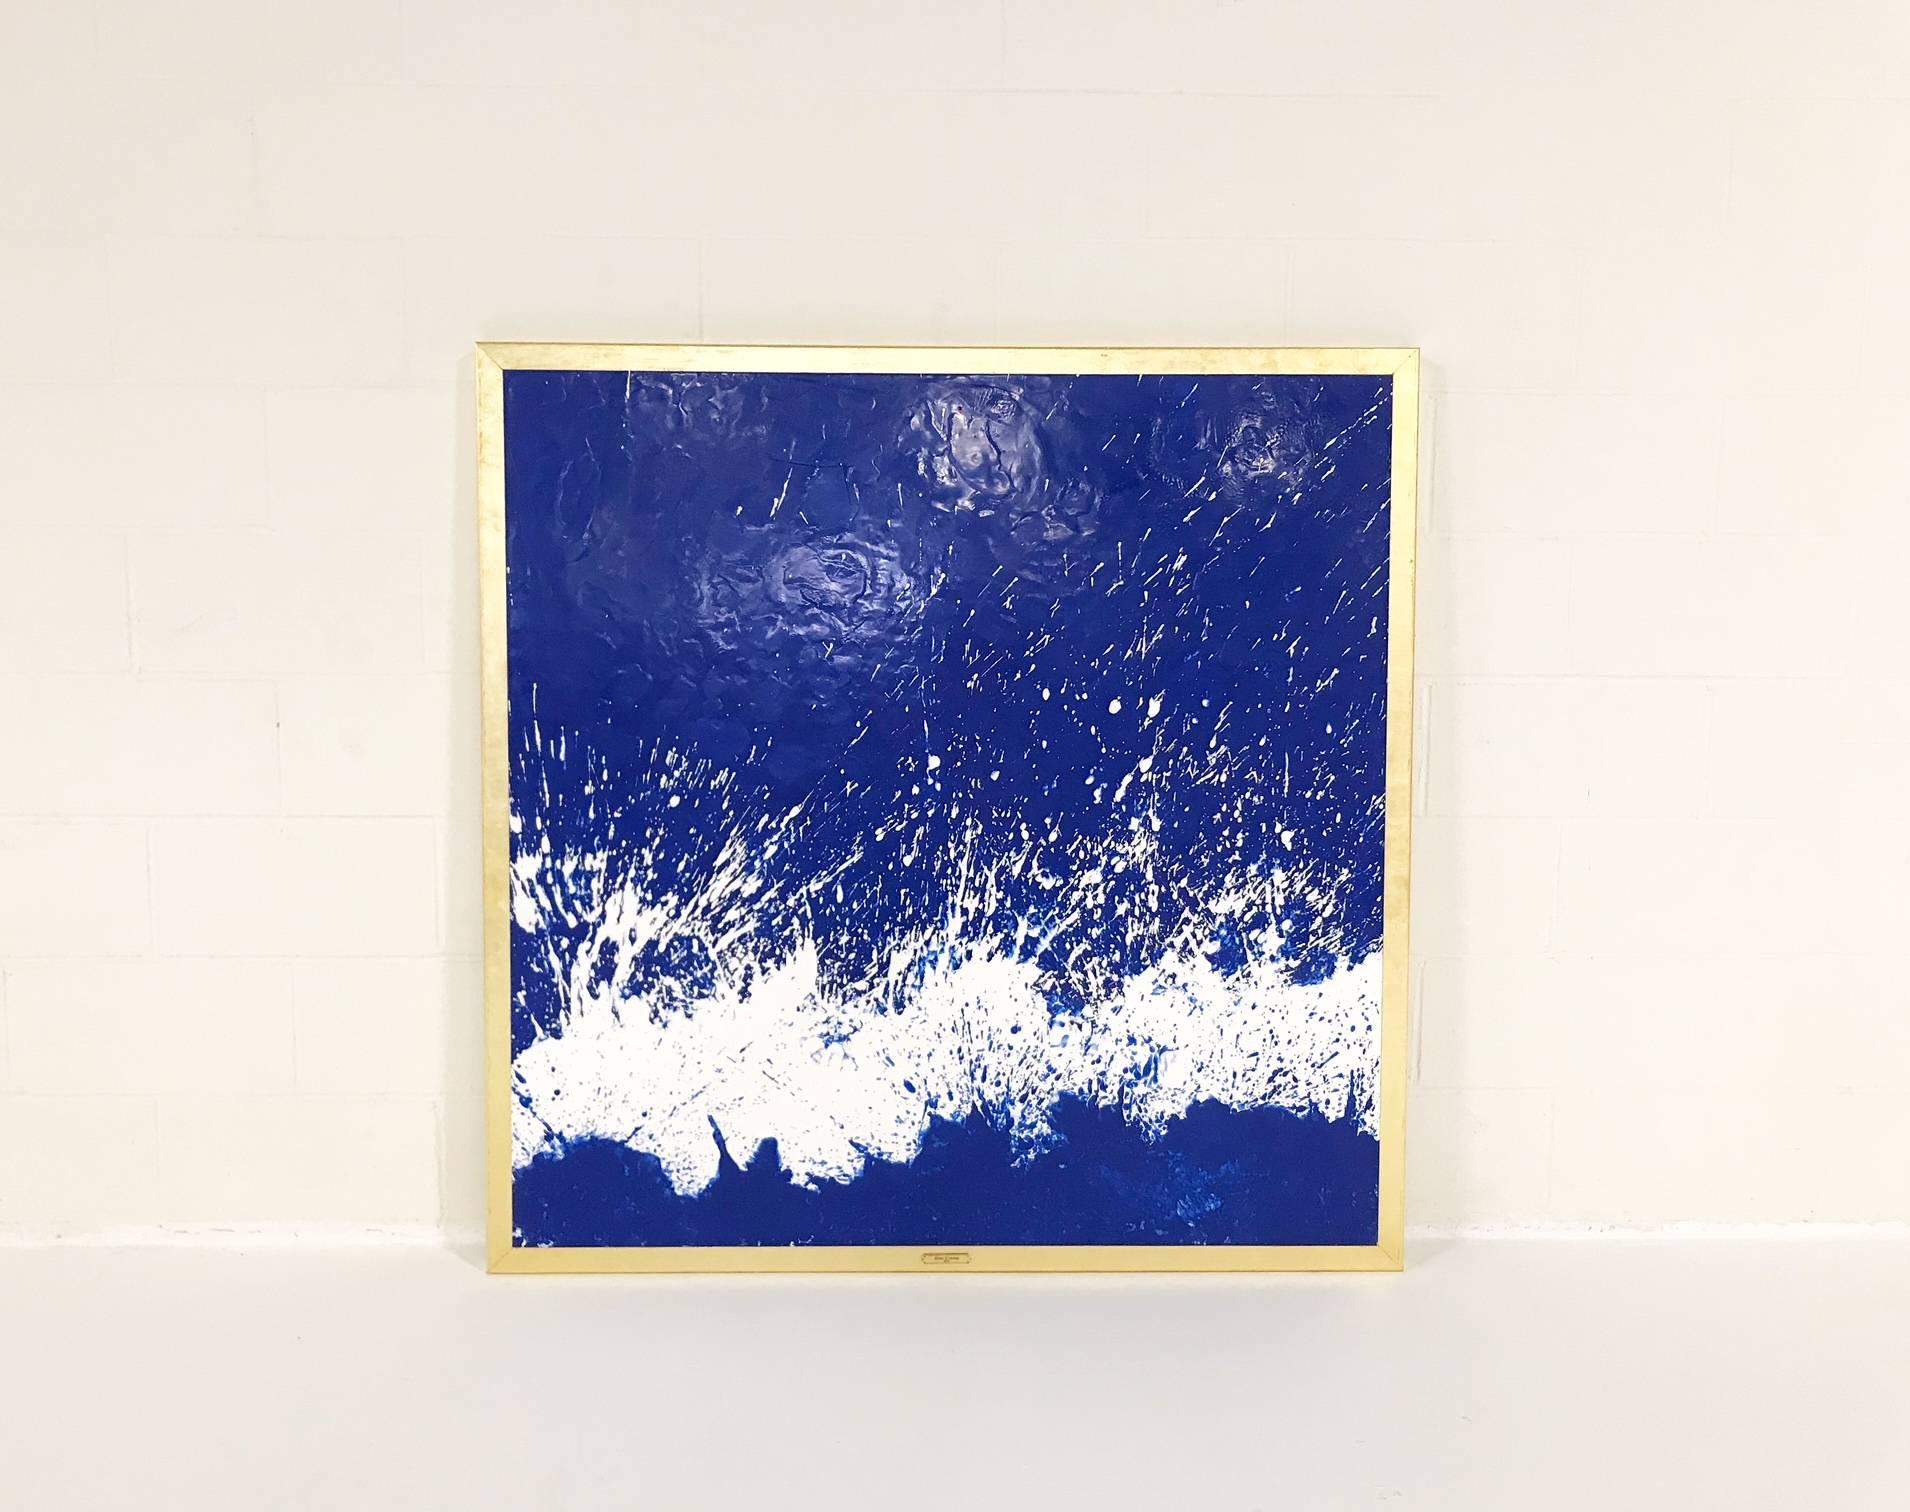 John O'Hara. 2018. Encaustic on board. Artist made frame, 23.75-karat gold leaf on oak.

We are proud to represent John O’Hara, a self-taught artist from Saint Louis whose work is found in some of the most beautiful rooms on Earth. His large-scale